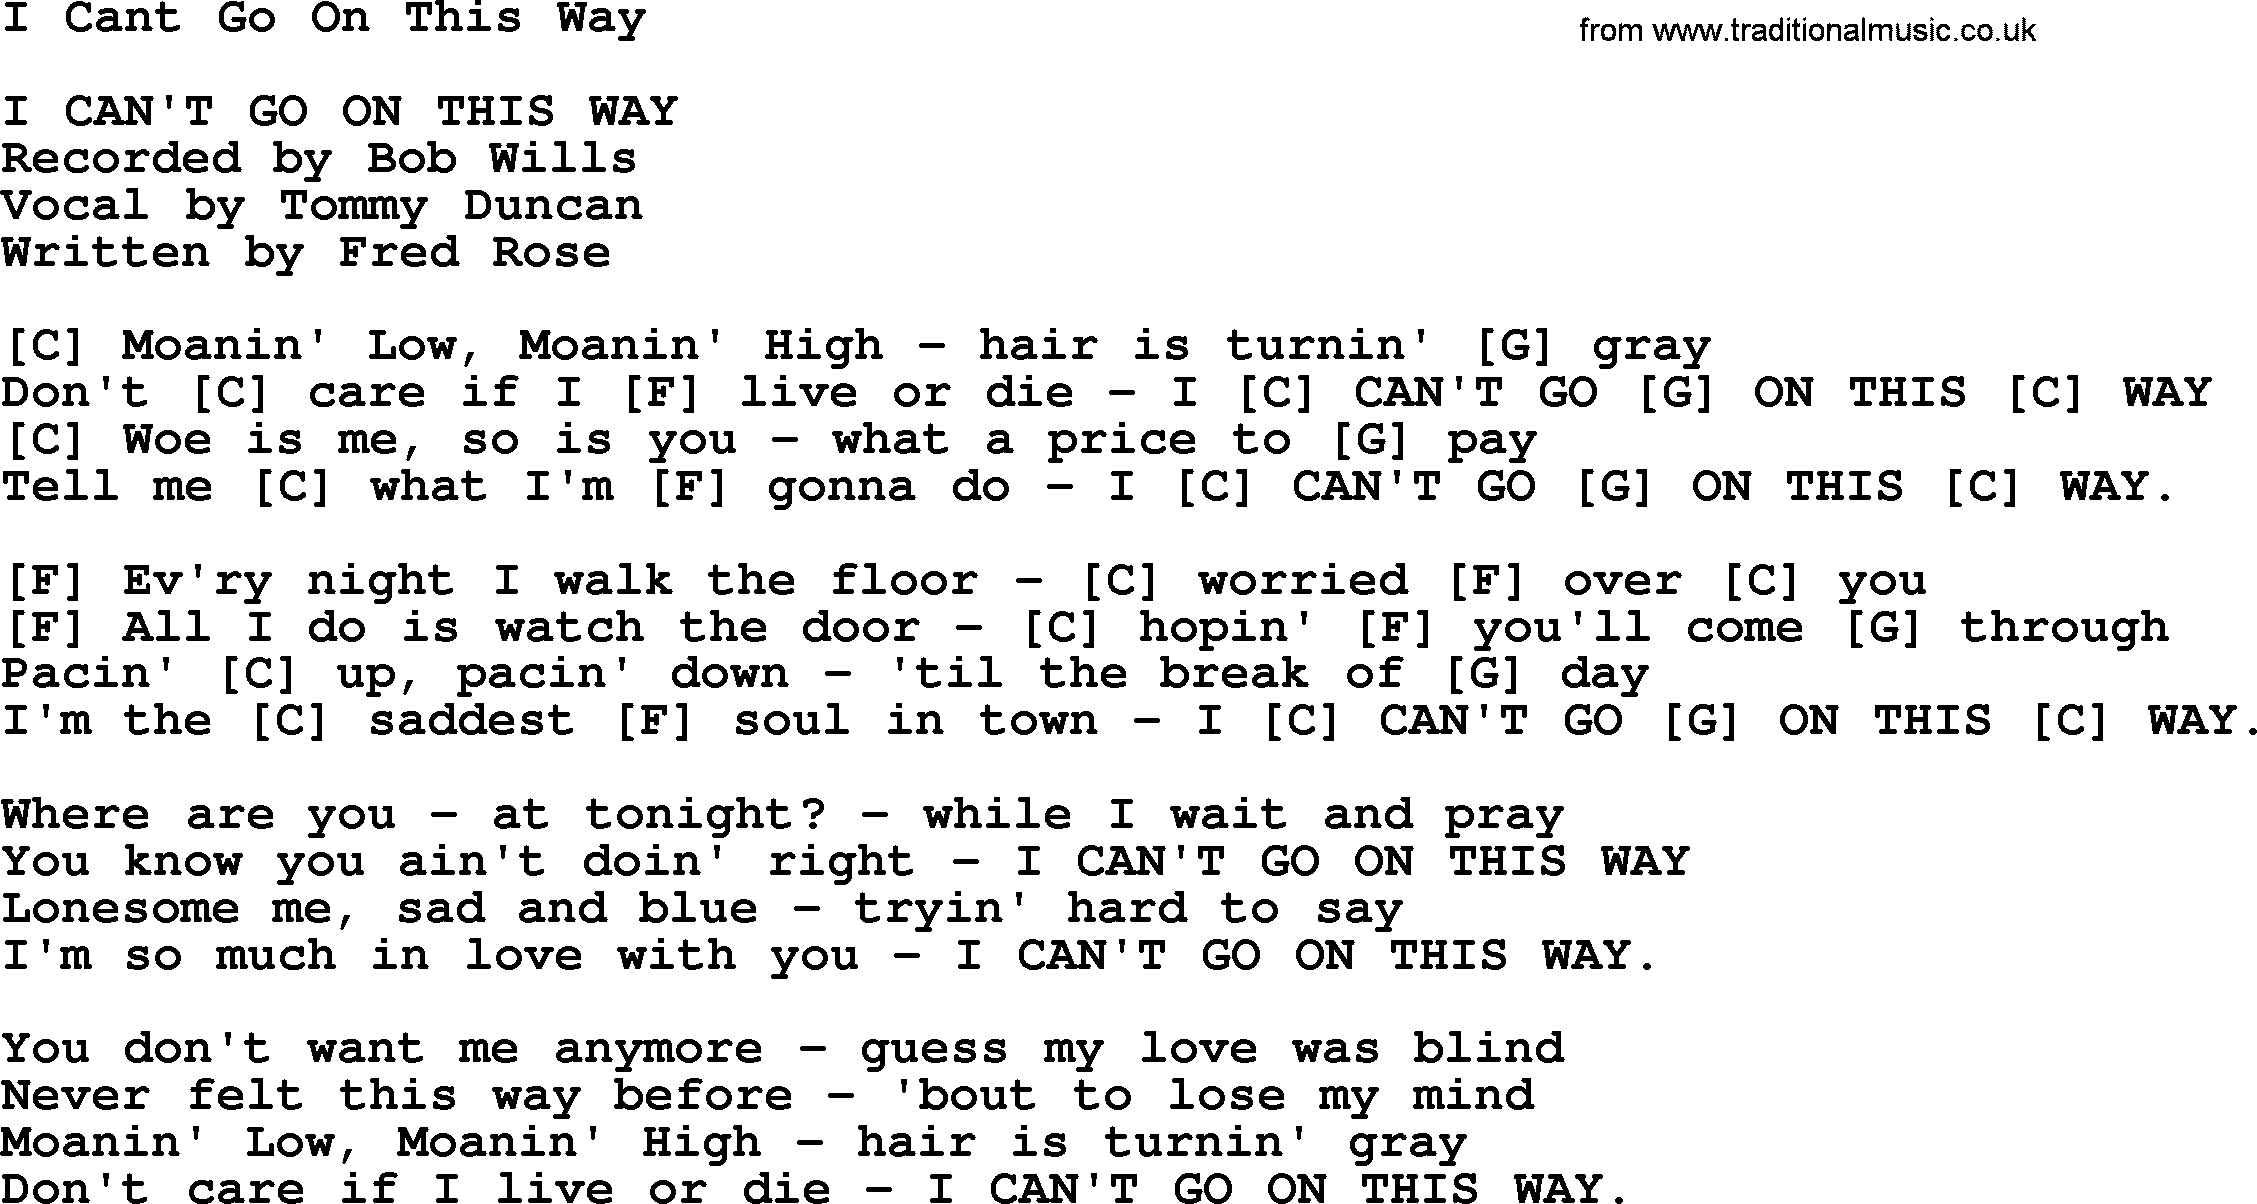 Bluegrass song: I Cant Go On This Way, lyrics and chords